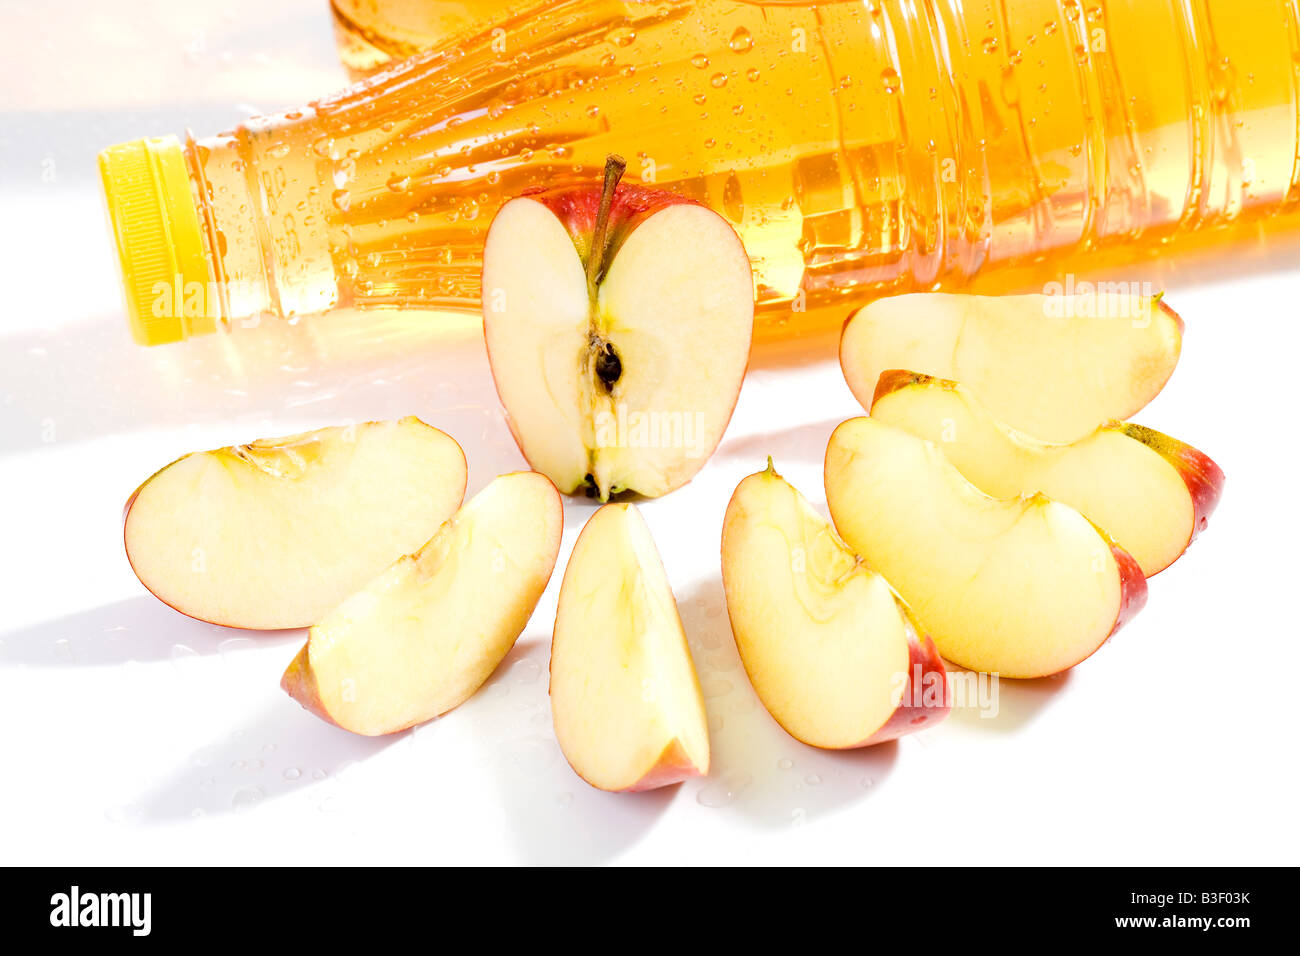 Apple slices and apple juice bottles, close up Stock Photo